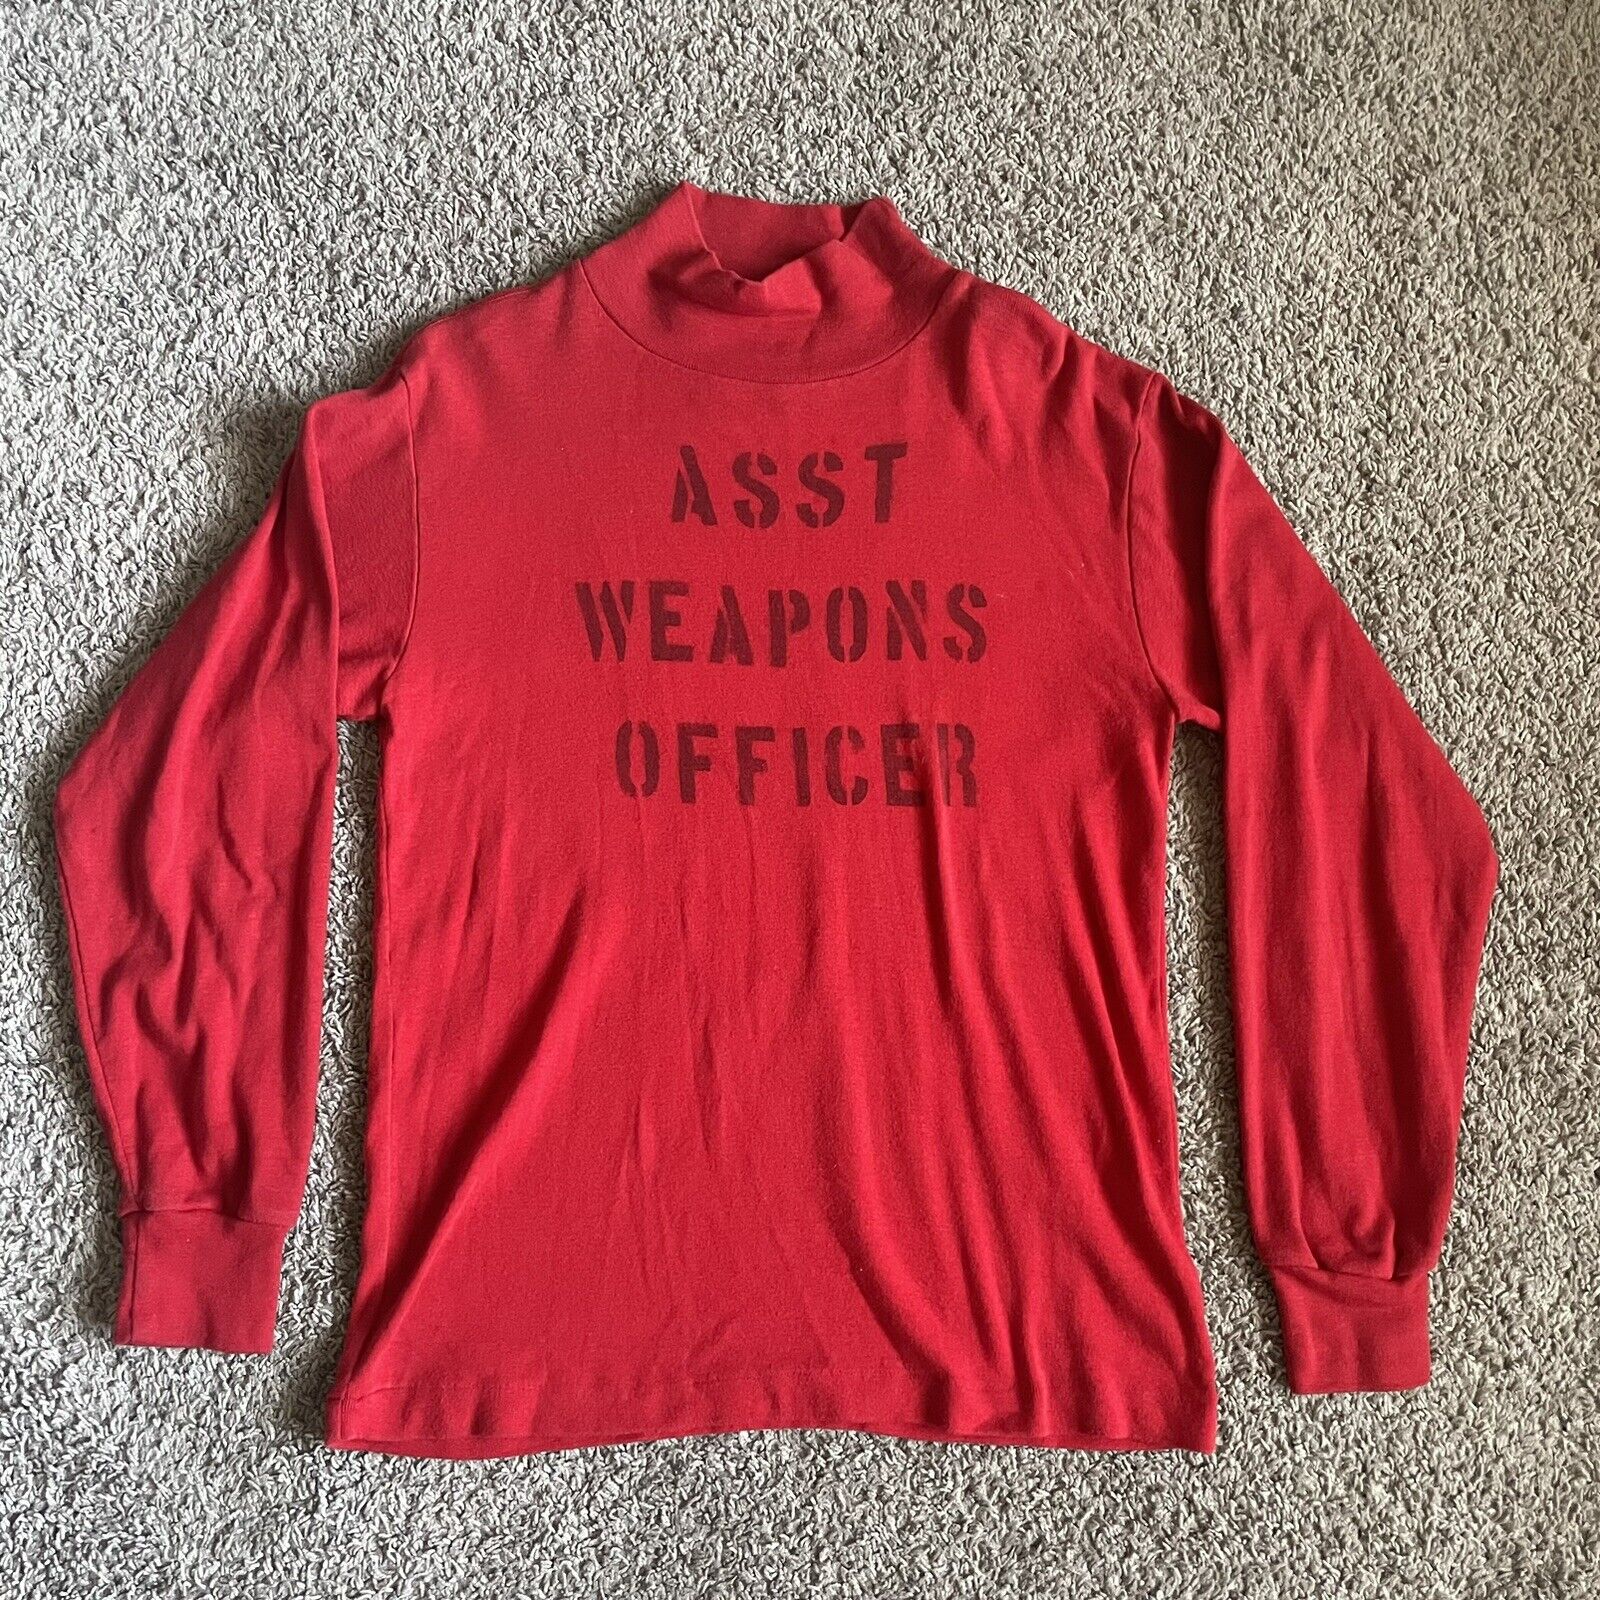 Vintage US Navy Flight Deck Shirt Red Size X Large Assistant Weapons Officer